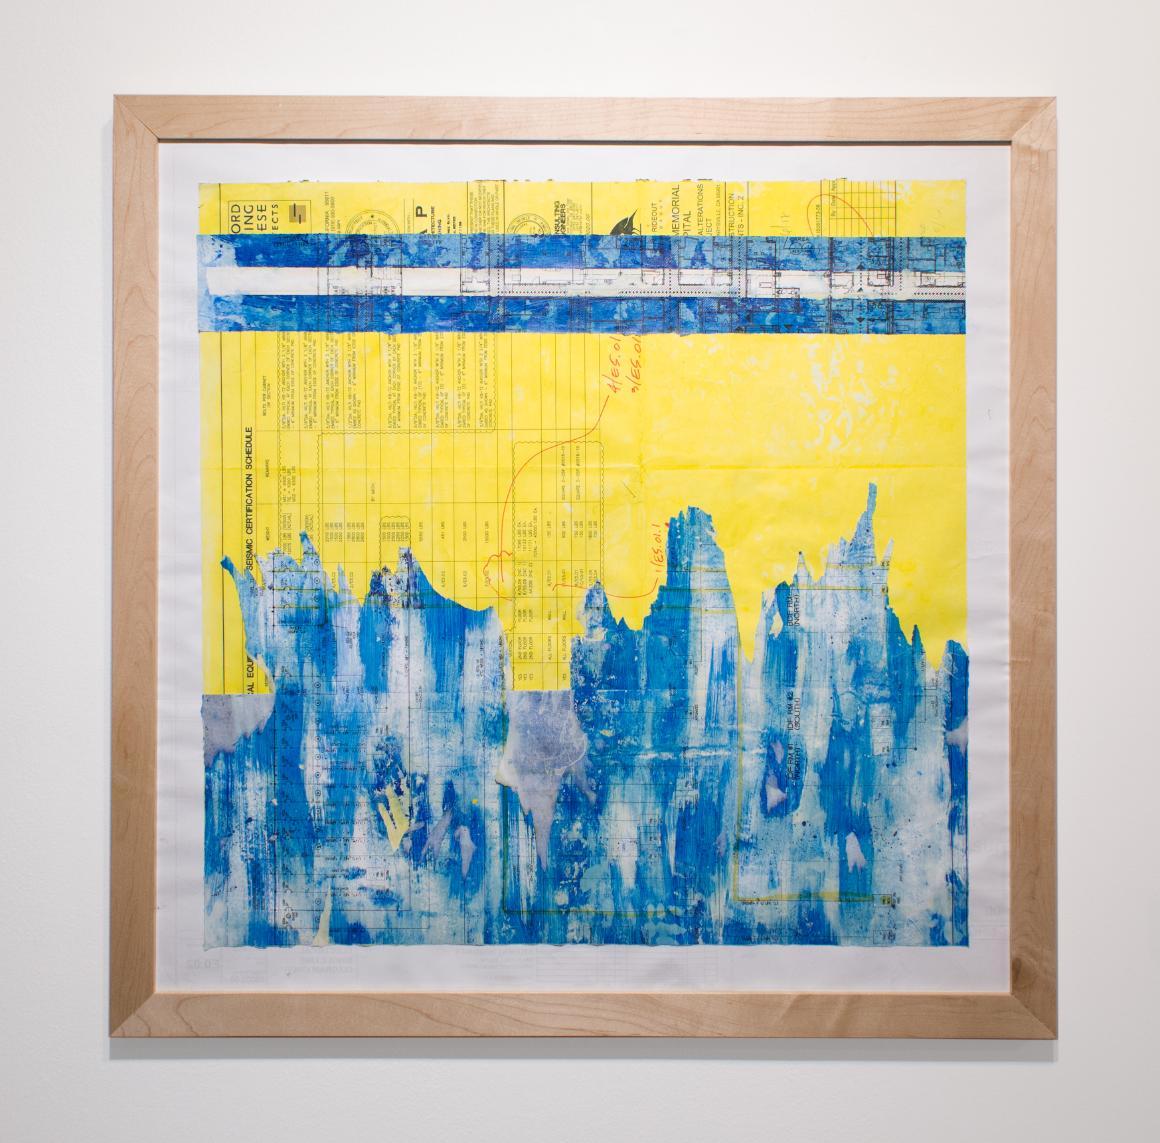 Ciaran Freeman, “Construction Collage,” recycled printer toner on found construction drawings, 30” x 30”, 2018. Made as part of the Artist-in-Residency Program at Recology in San Francisco. Used with permission.